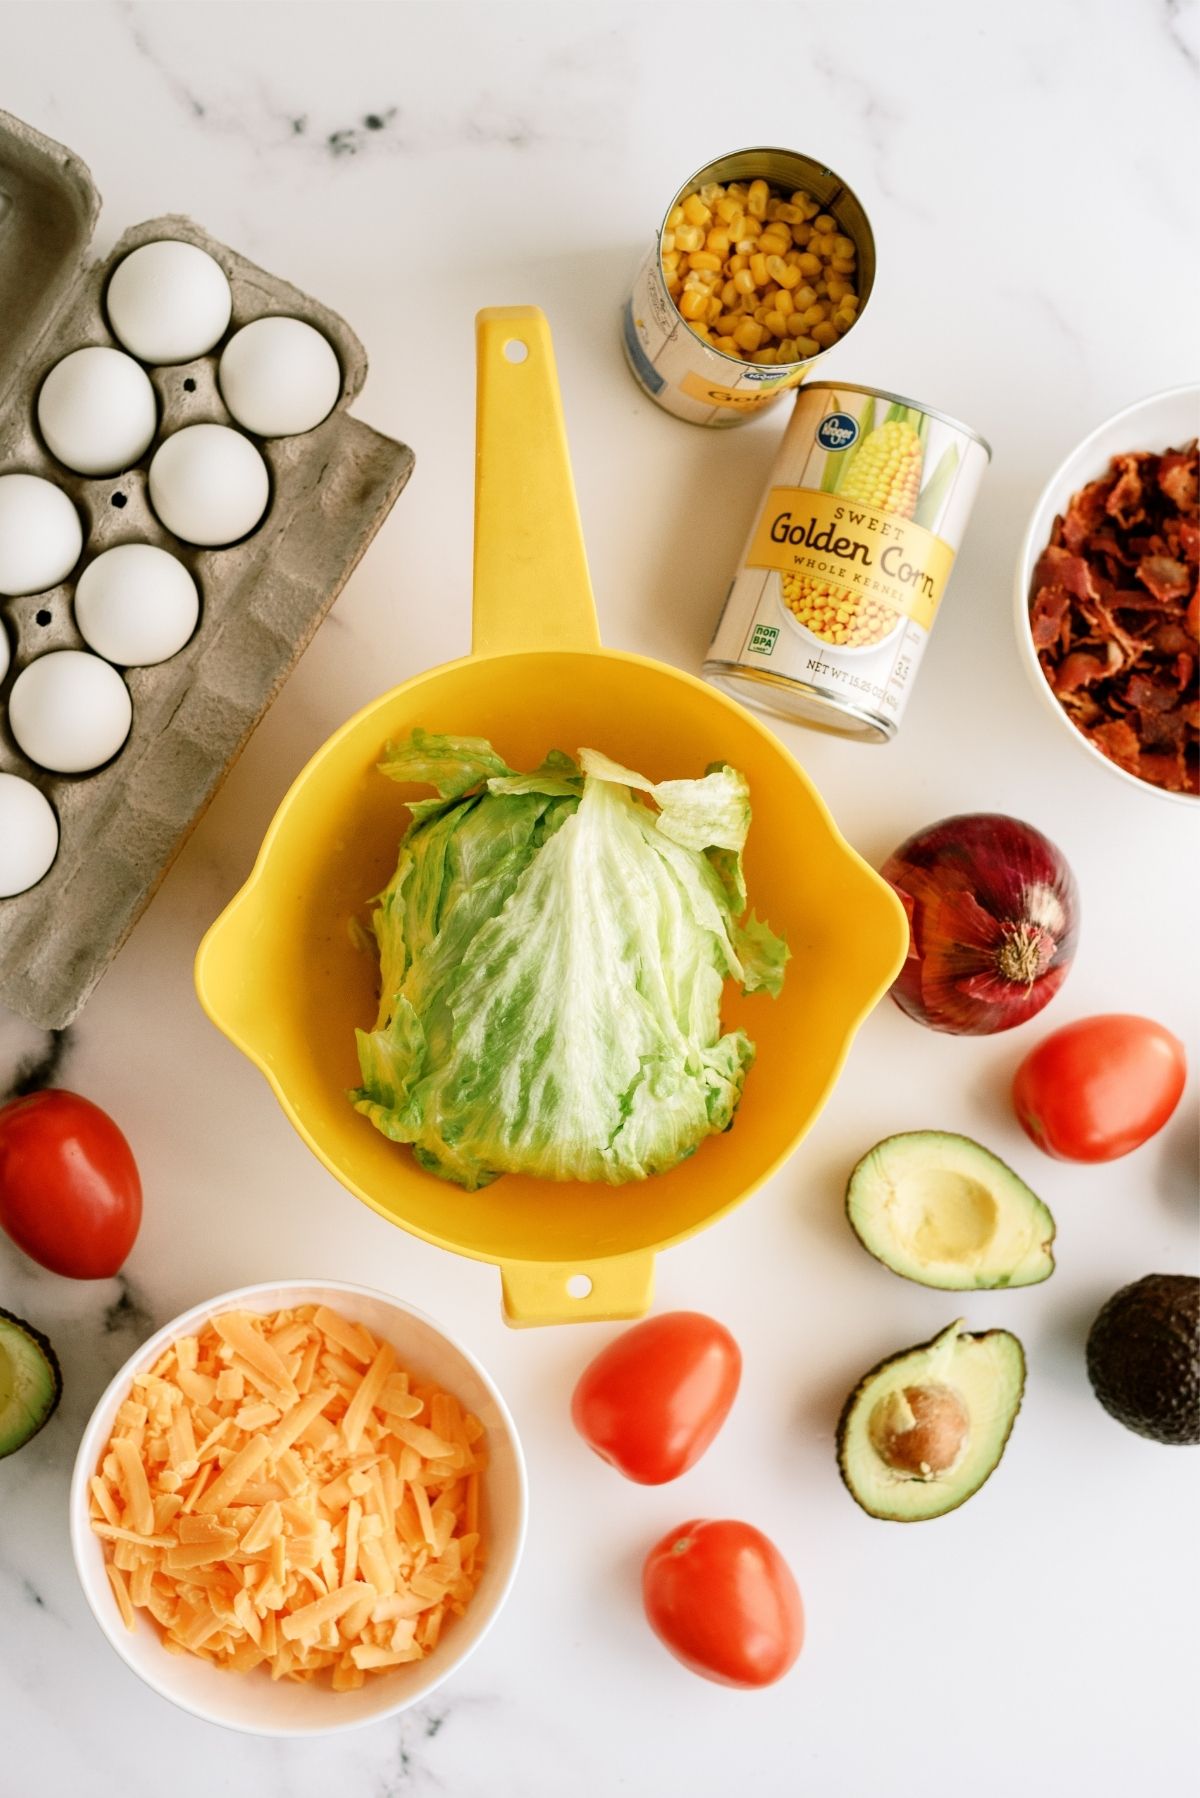 Ingredients for Layered Cobb Salad